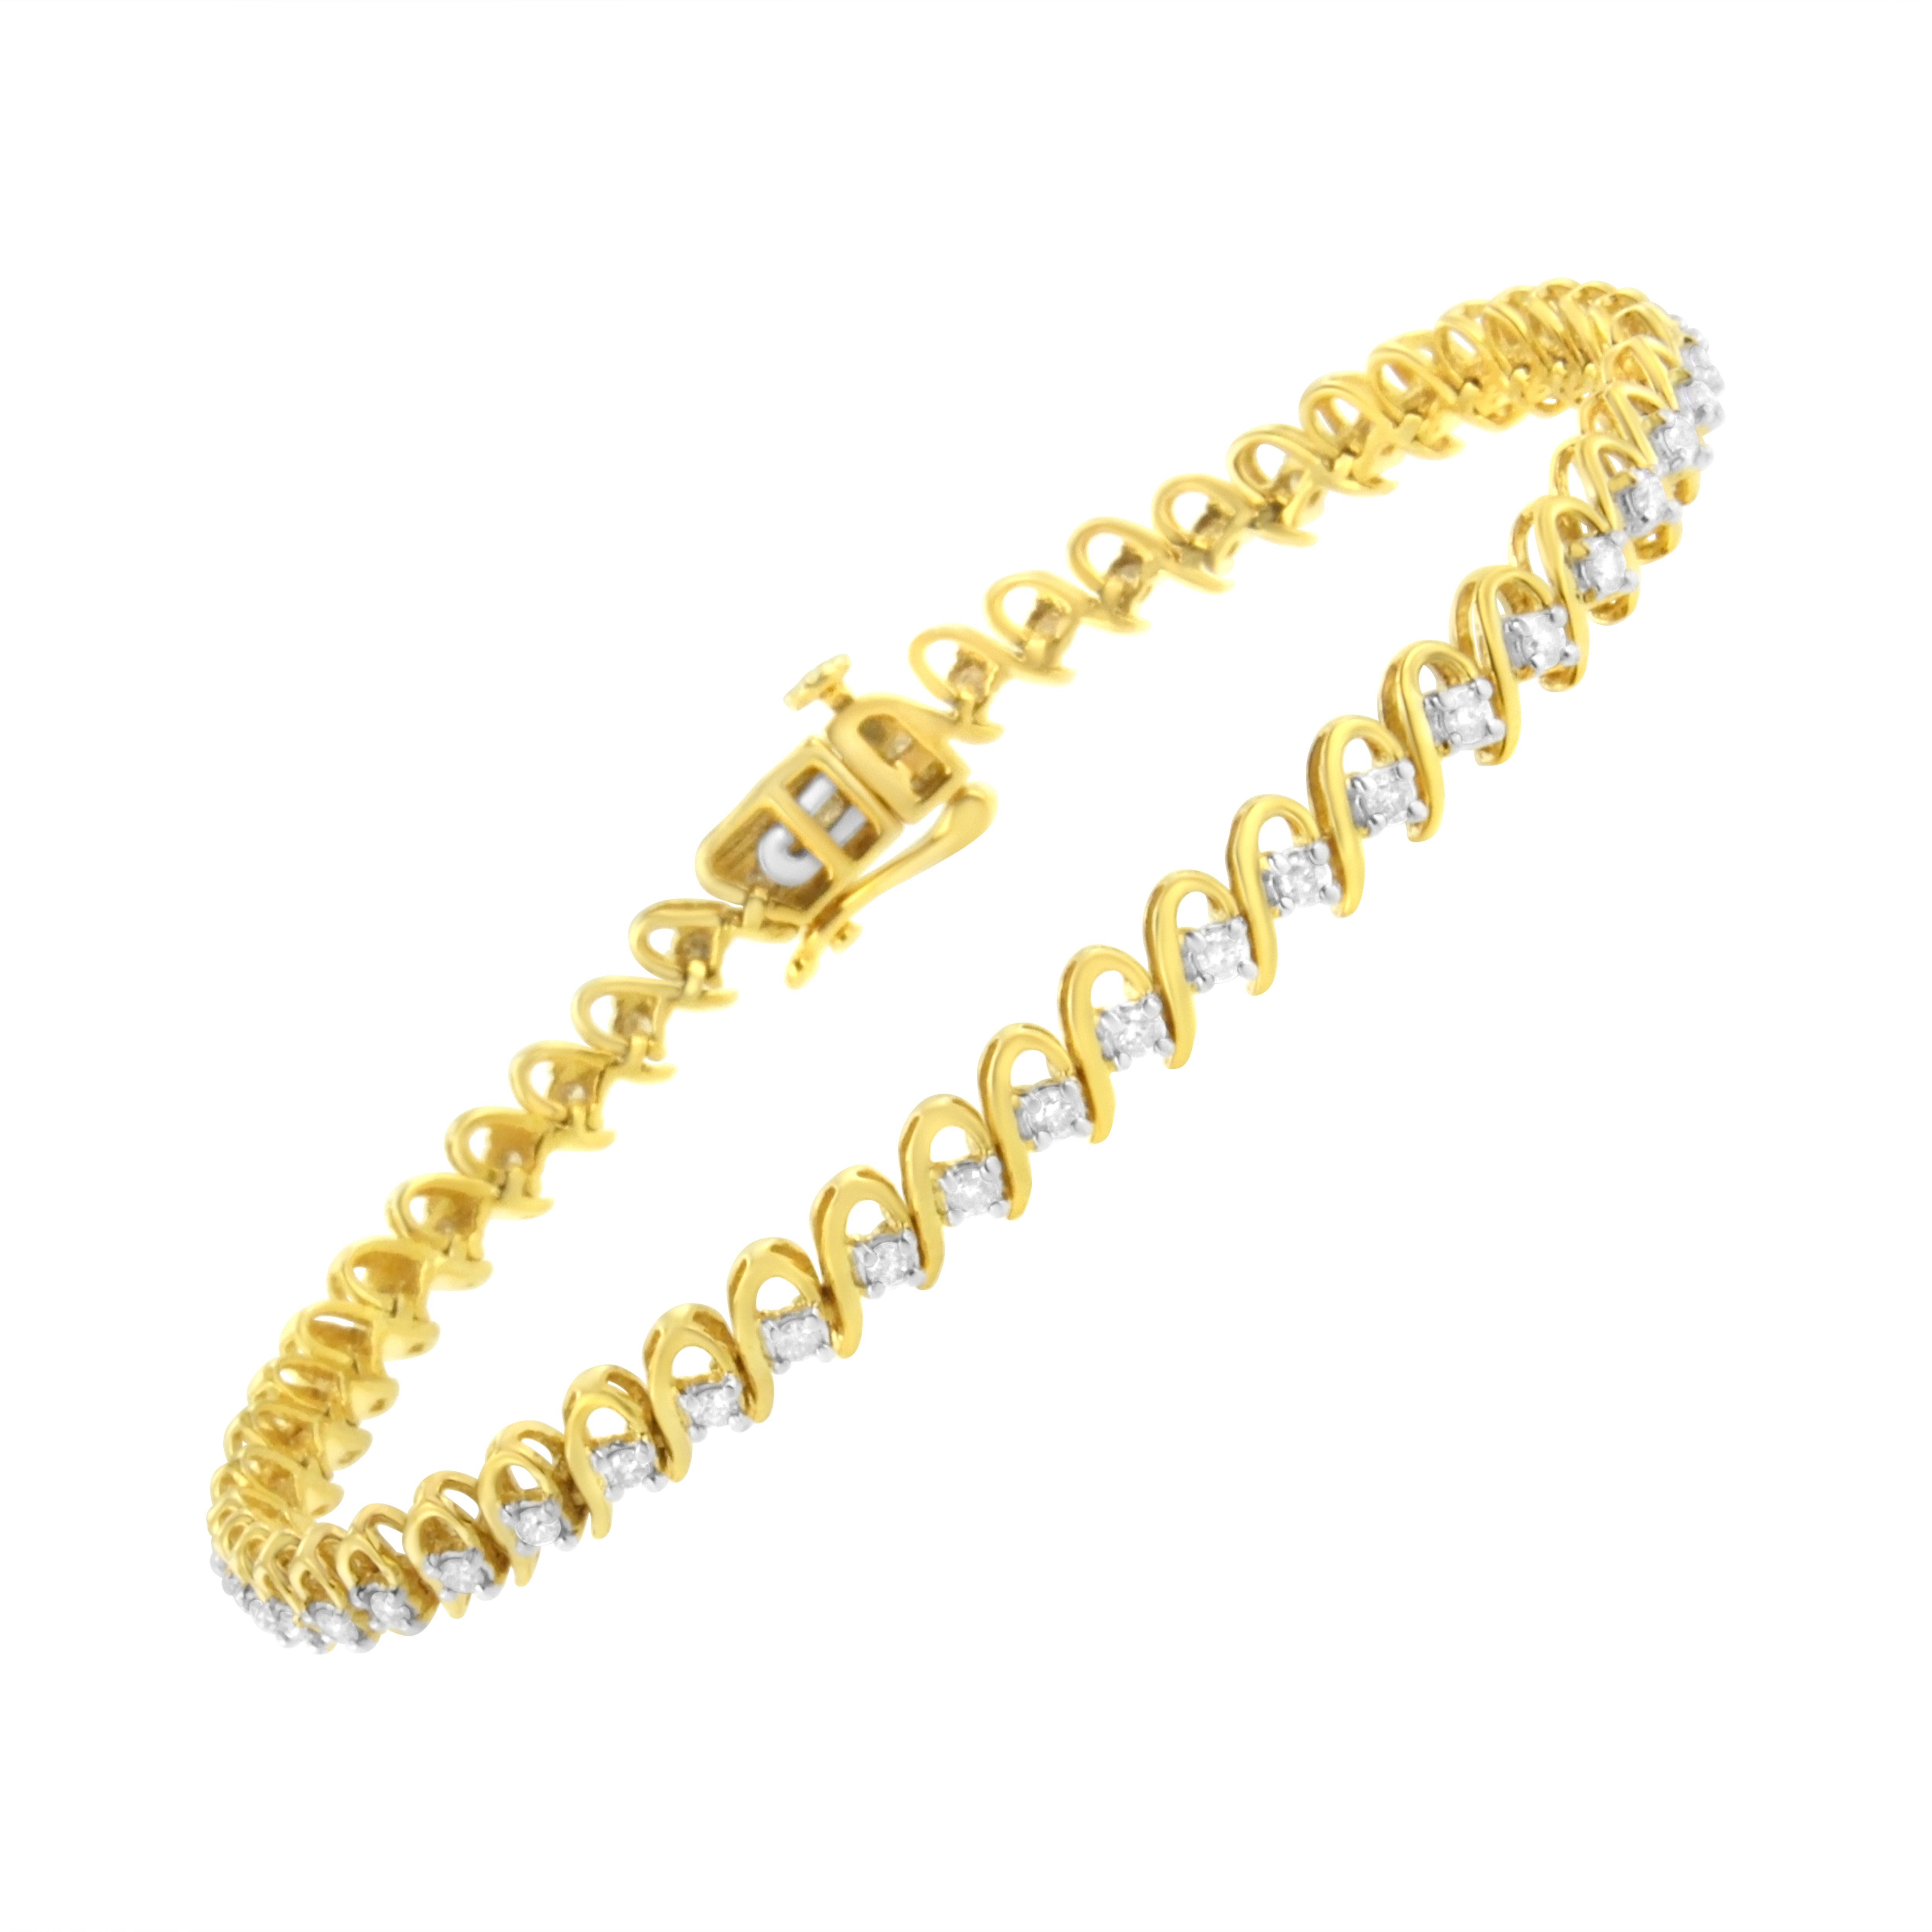 This unique bracelet is crafted with 1ct TDW of round cut diamonds nestled between a warm yellow gold ribbon that creates a spiral effect. This 10k yellow gold plated sterling silver design is a great statement piece that secures with a box with